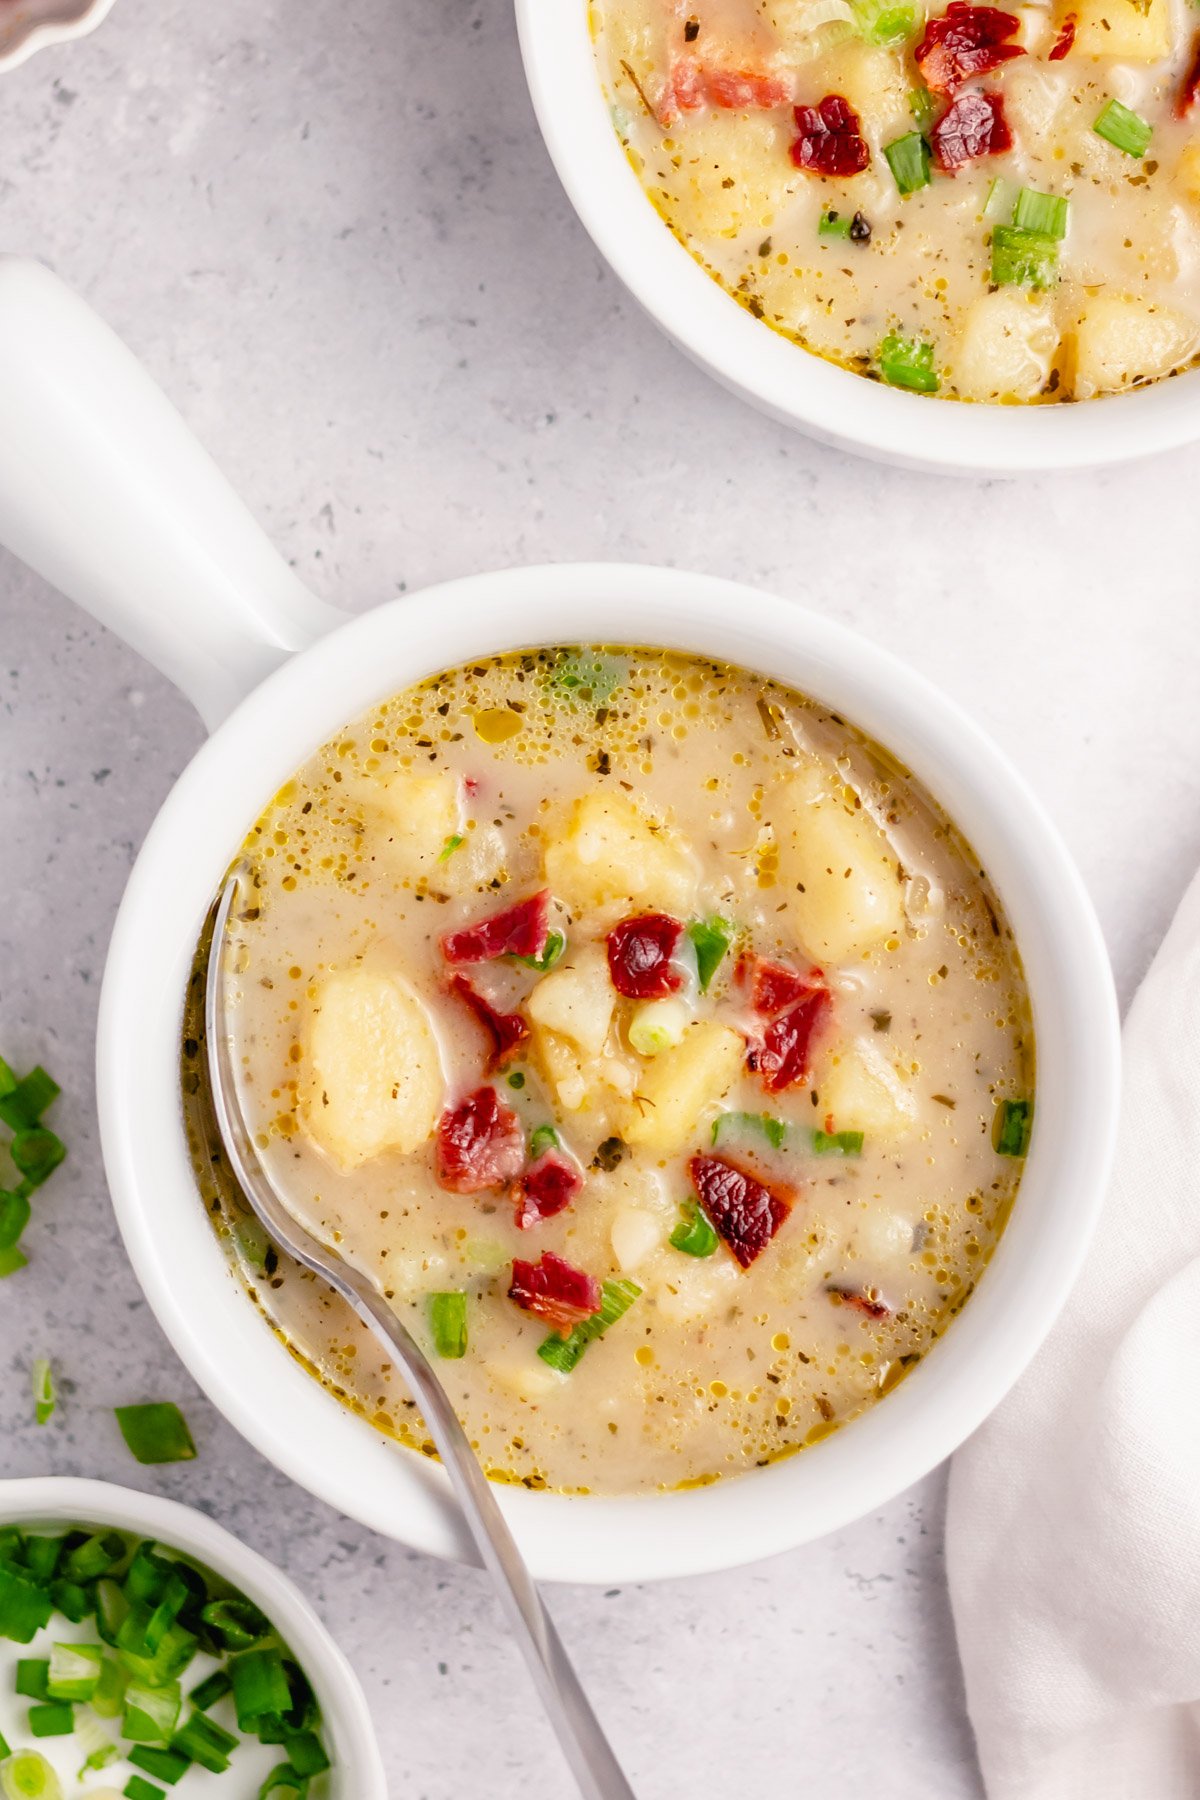 This Whole30 potato bacon chowder is an easy soup recipe that can be made in either the instant pot or slow cooker. The potatoes and bacon combine with the onions and a few other fresh ingredients for a healthy, dairy free weeknight meal that's gluten free, paleo, and is also a great meal prep recipe. #potatobaconsoup #whole30soup #glutenfreesoup #instantpotsoup #30minutemeals